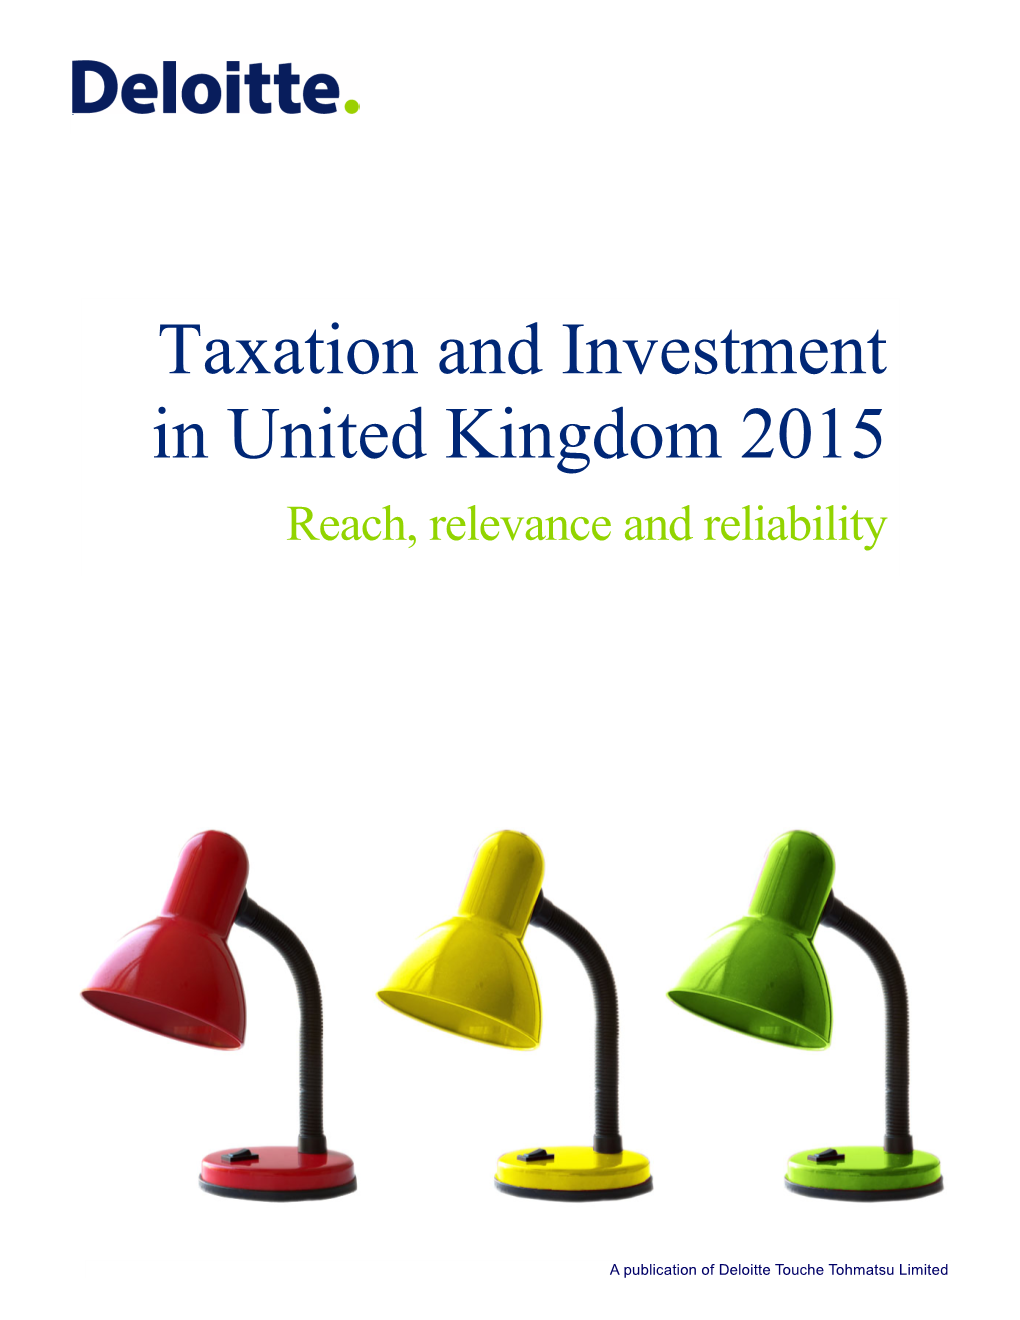 Taxation and Investment in United Kingdom 2015 Reach, Relevance and Reliability